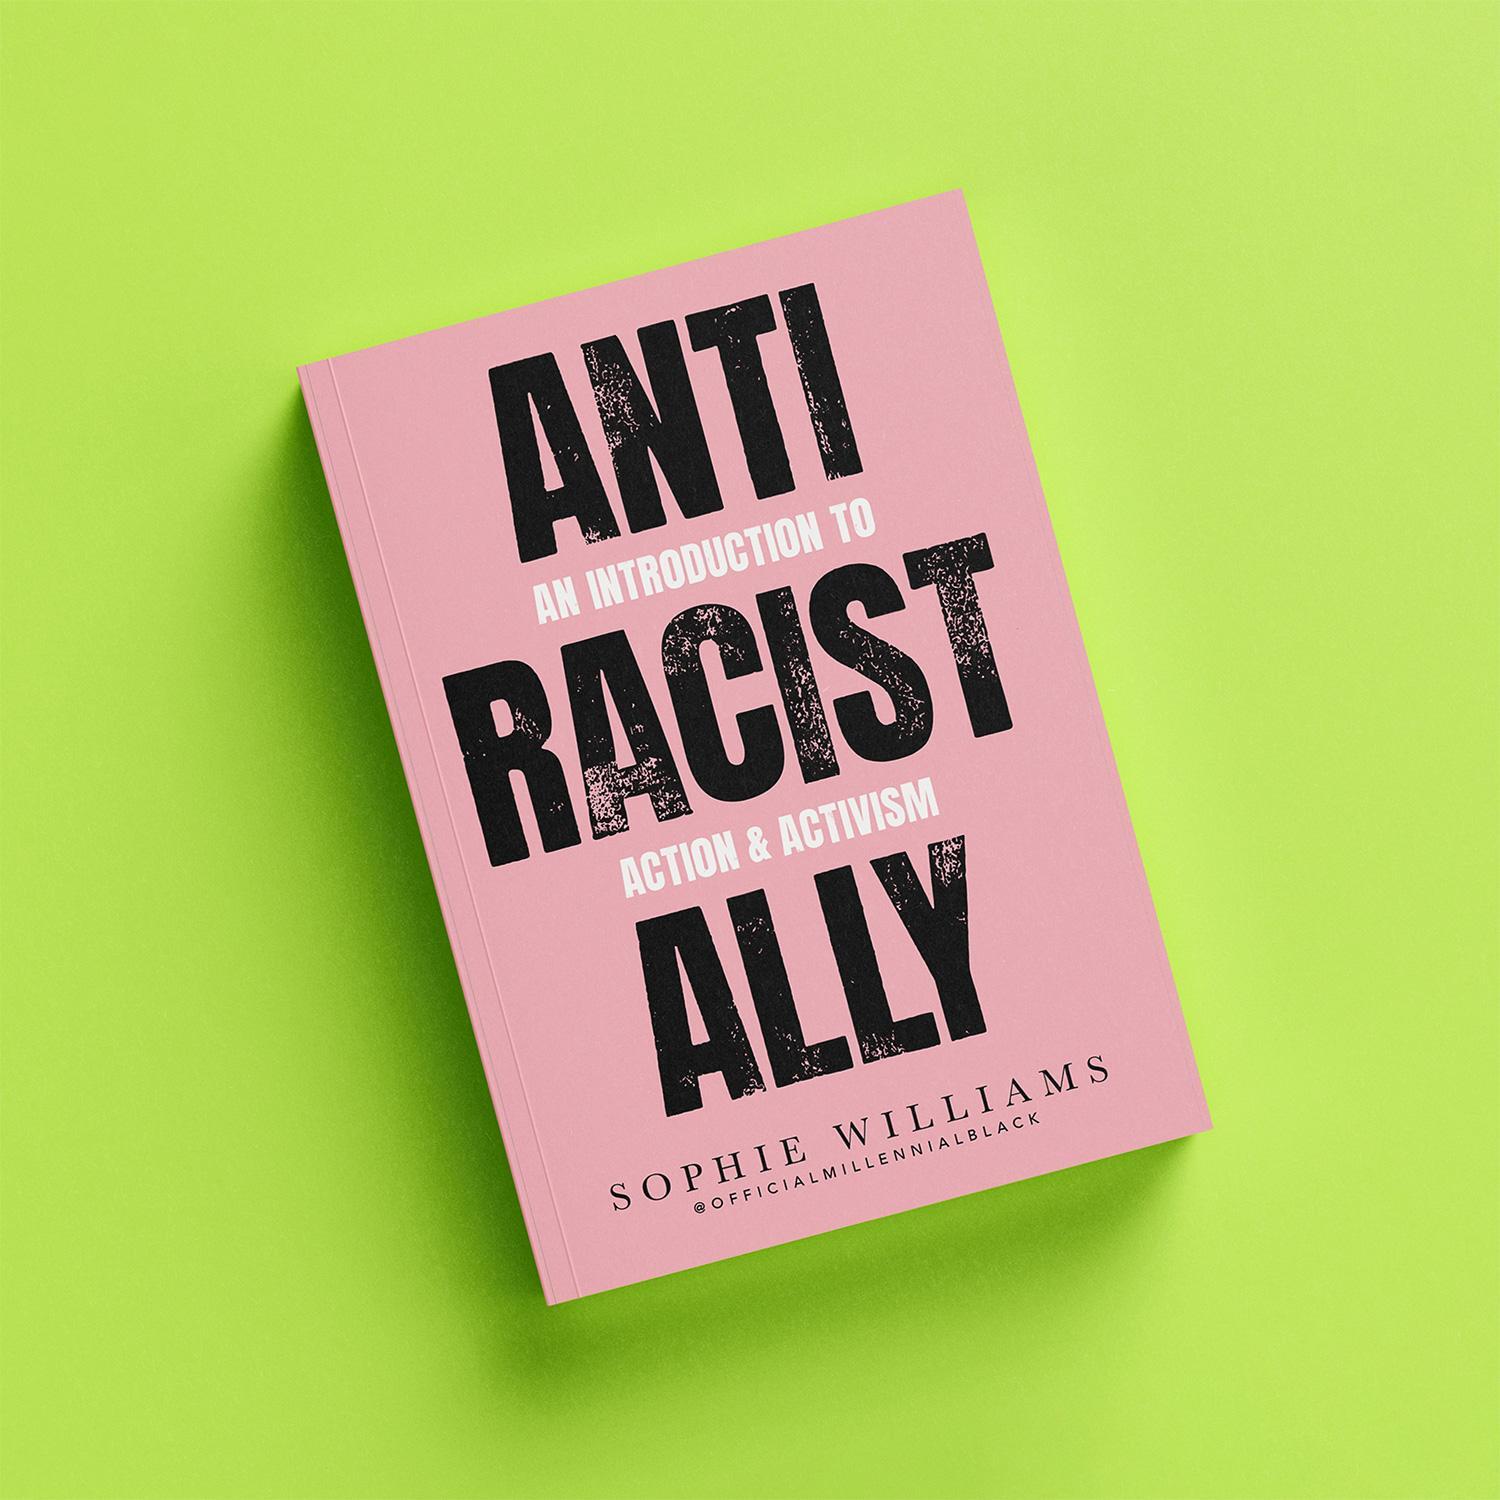 Bild: 9780007985128 | Anti-Racist Ally | An Introduction to Action and Activism | Williams